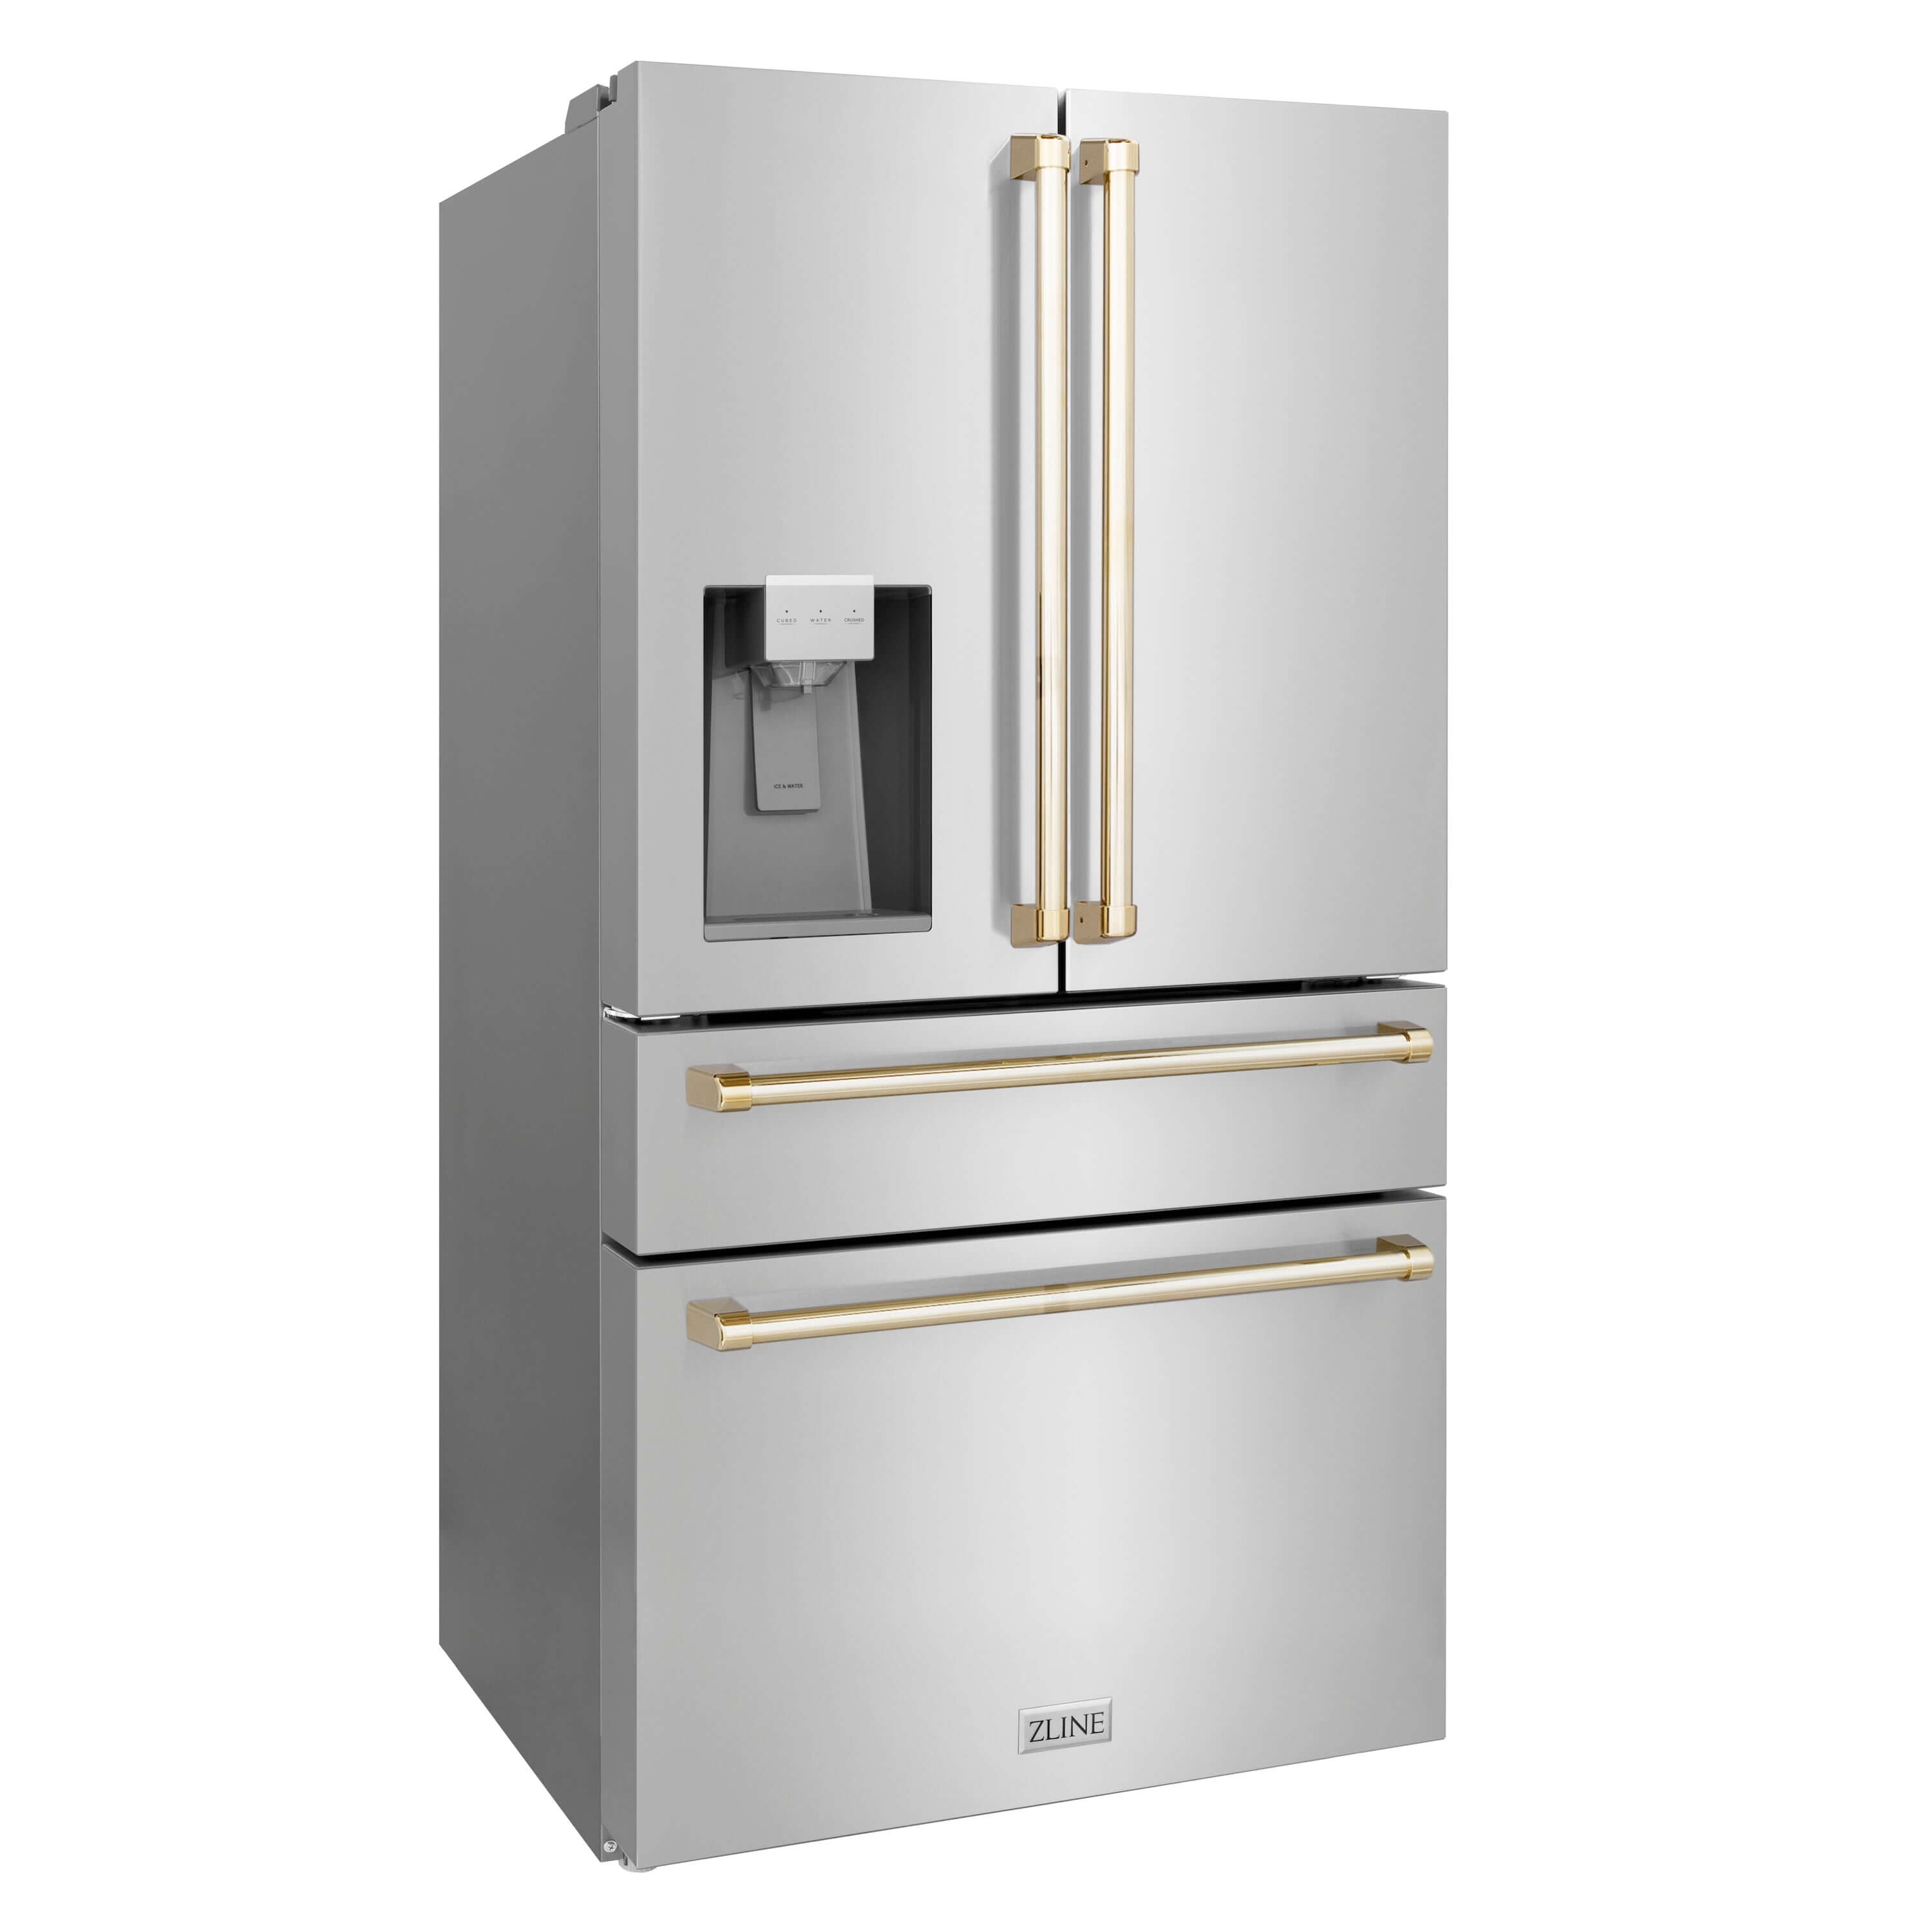 ZLINE 36 in. Autograph Edition 21.6 cu. ft Freestanding French Door Refrigerator with Water Dispenser in Stainless Steel with Champagne Bronze Accents (RFMZ-W-36-CB)